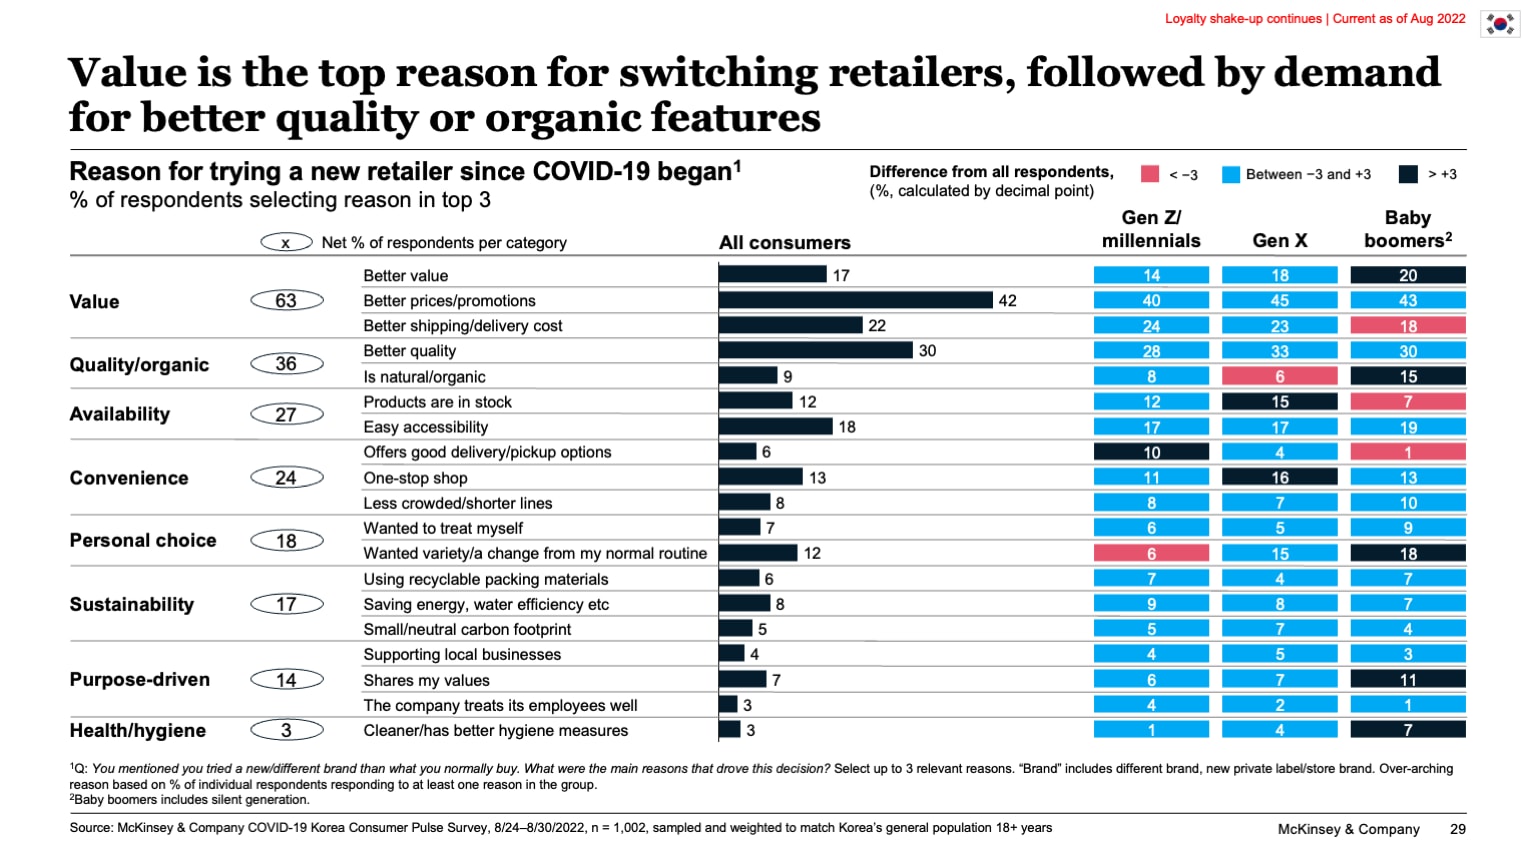 Value is the top reason for switching retailers, followed by demand for better quality or organic features